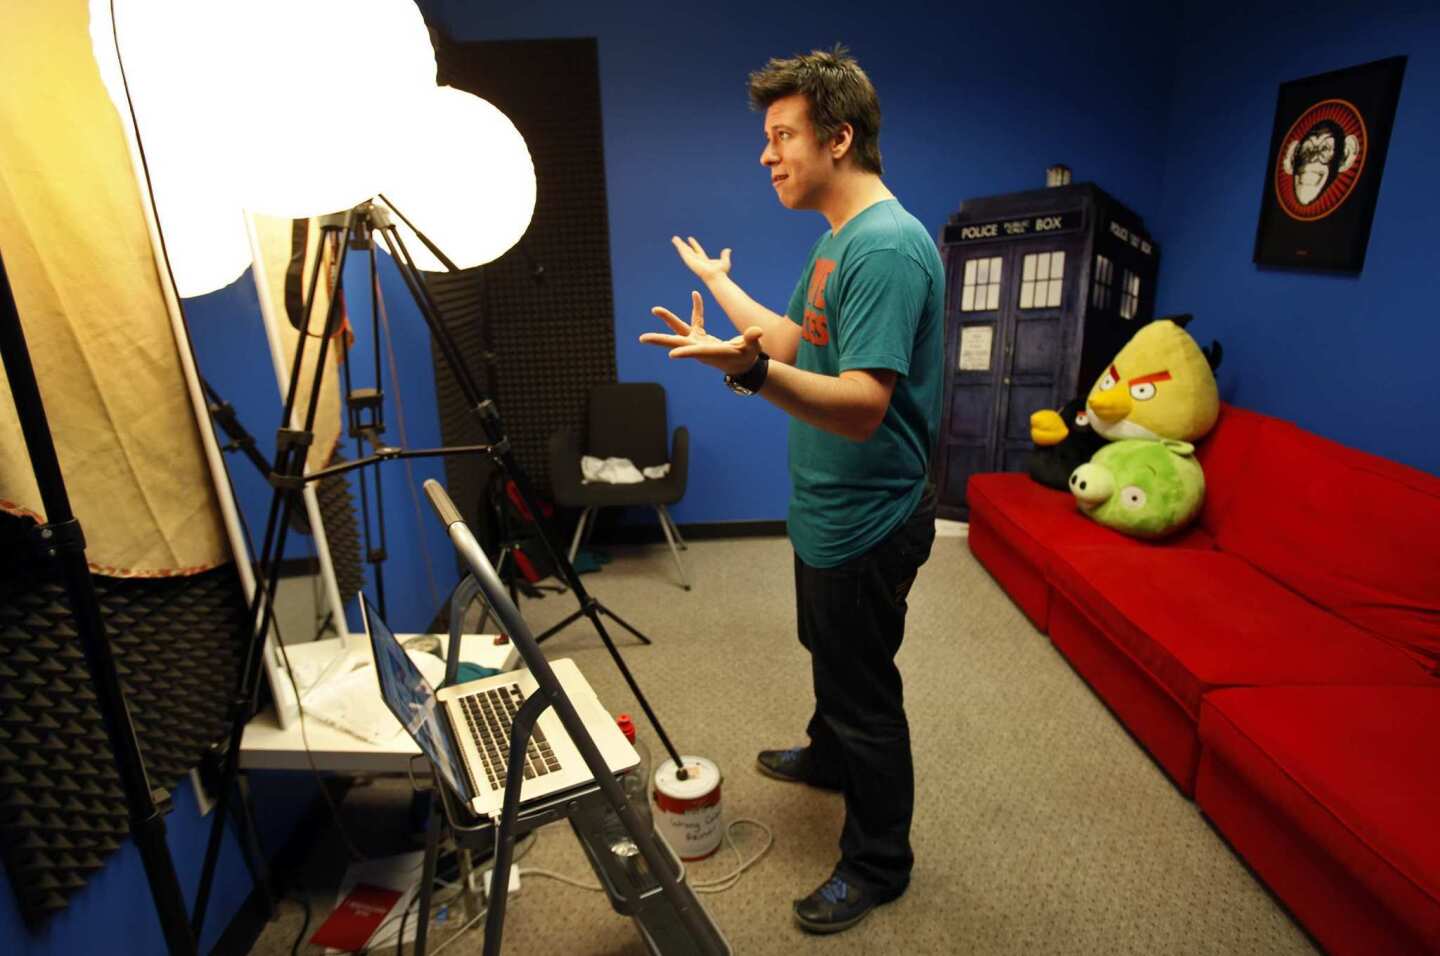 Philip DeFranco delivers his lines to his camera during a run-through Aug. 21 in the simple studio of his Woodland Hills production offices where he records his show as host of the "The Philip DeFranco Show," a news program on YouTube about news and pop culture. The show rivals Jon Stewart's "The Daily Show" in audience size. As the news anchor, DeFranco wears T-shirts instead of the standard-issue suit-and-tie, and the anchor desk has been replaced with a red futon decorated with stuffed characters.